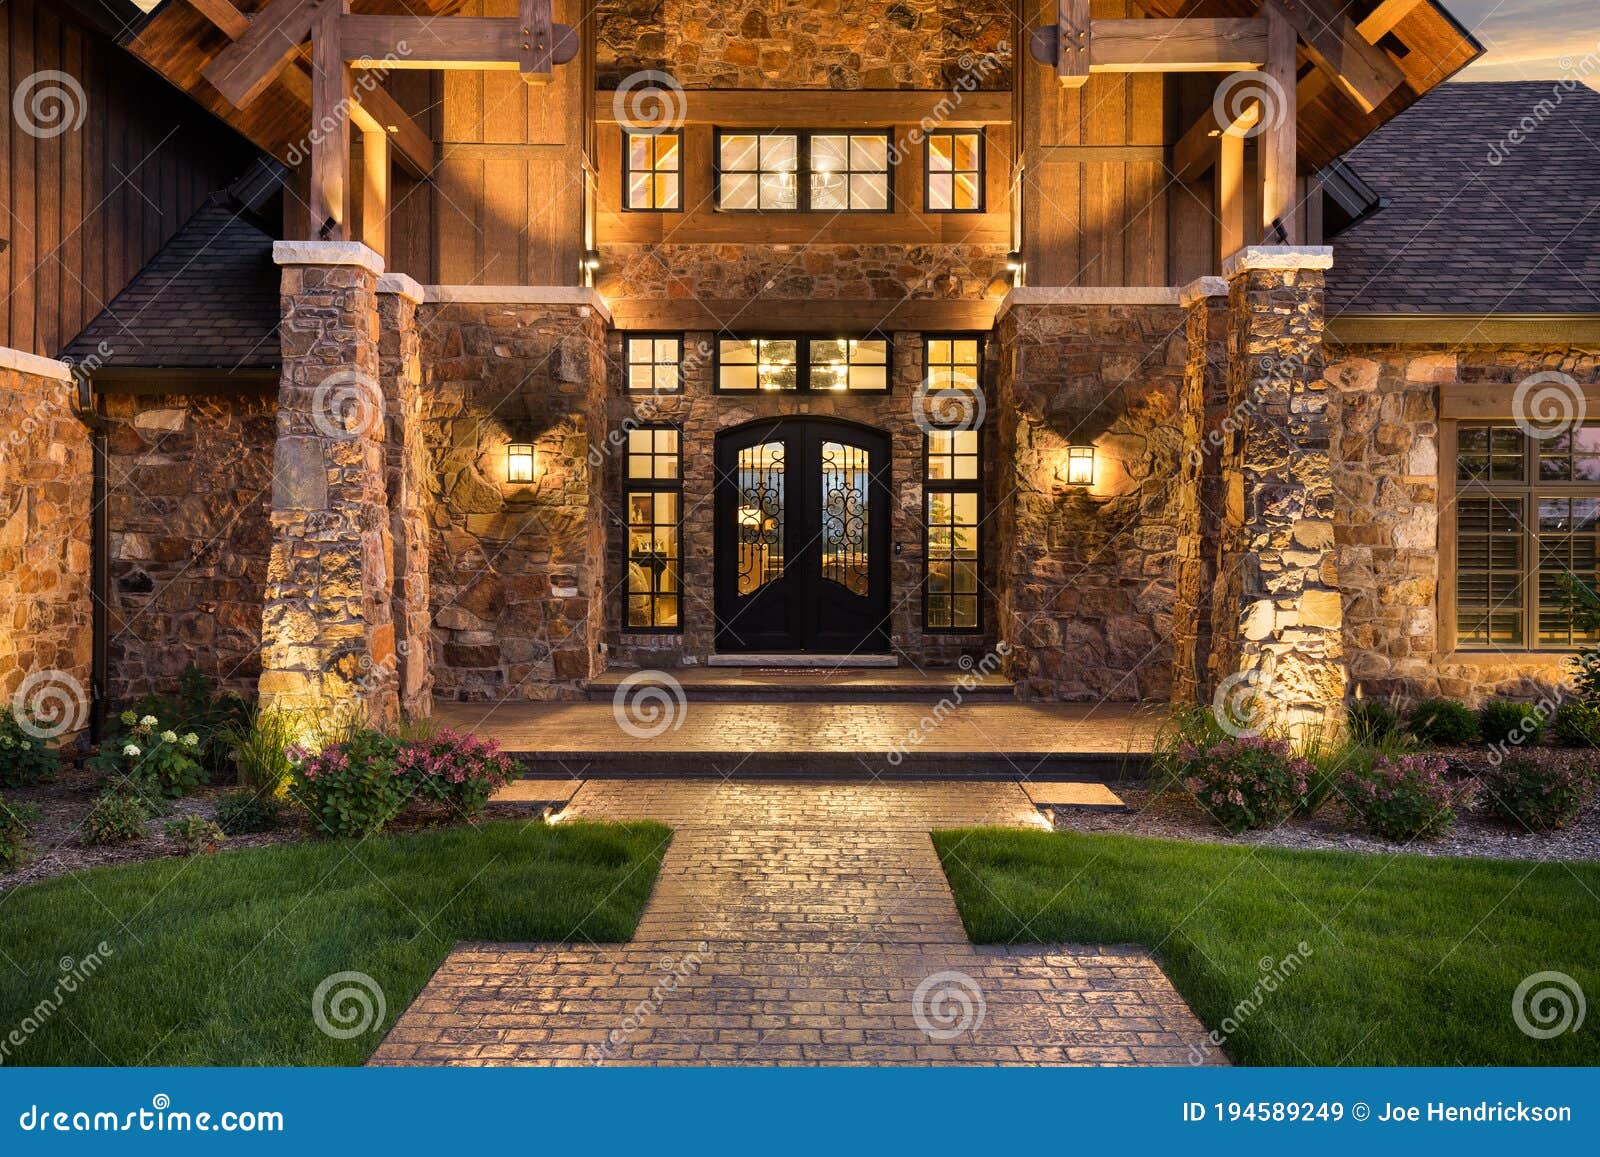 Modern House Exterior At Twilight. Luxury Villa With Garage. Stock Photo,  Picture and Royalty Free Image. Image 203466824.